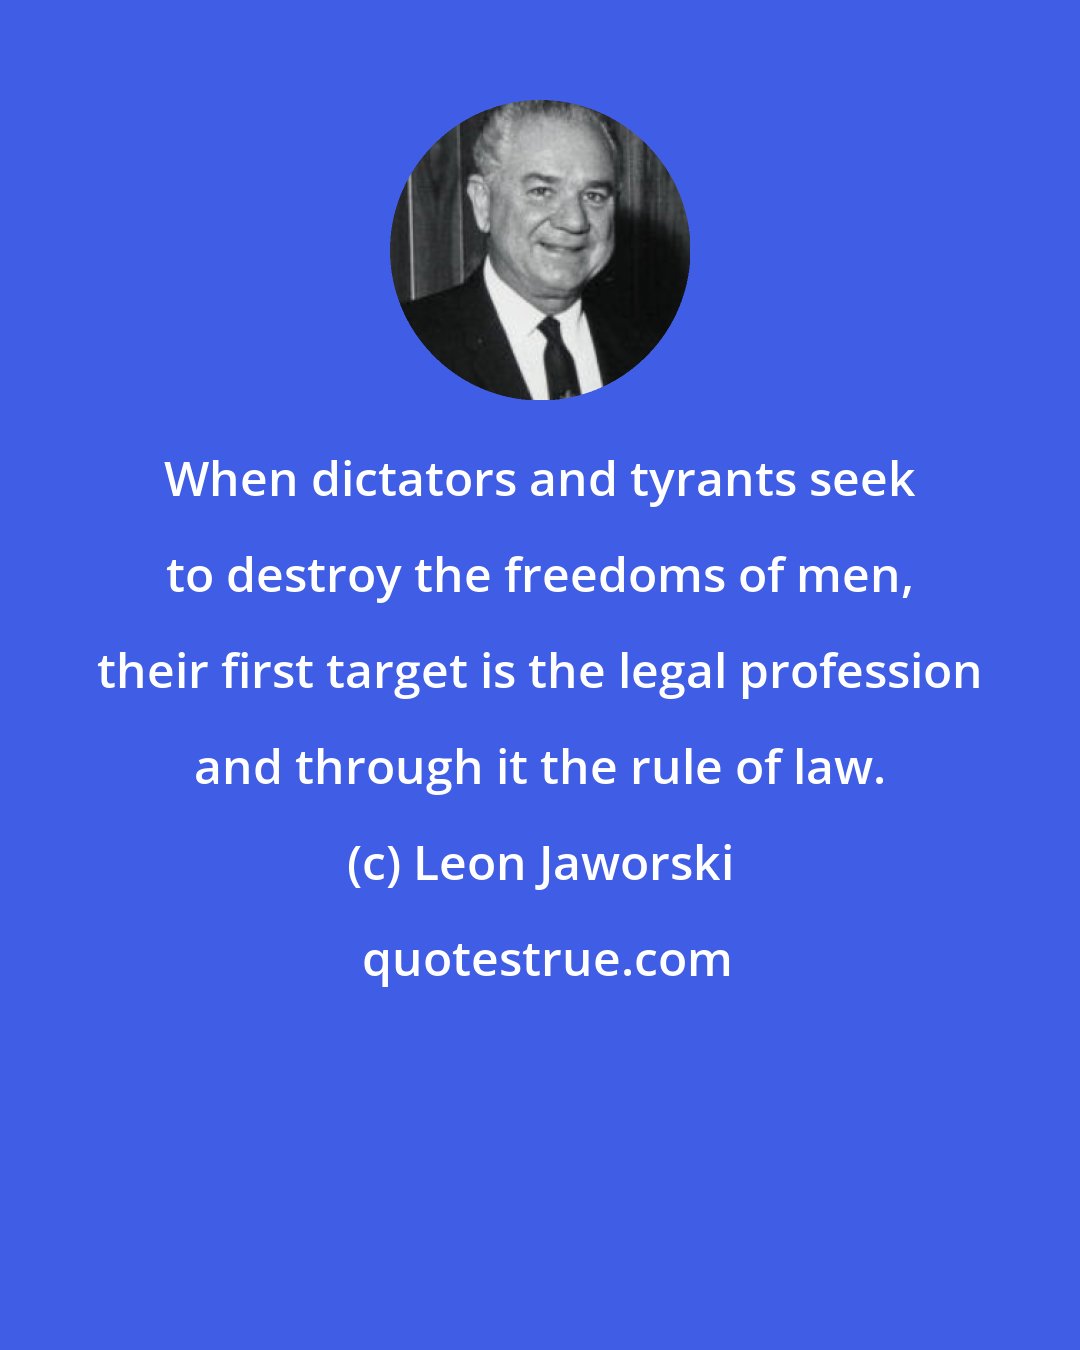 Leon Jaworski: When dictators and tyrants seek to destroy the freedoms of men, their first target is the legal profession and through it the rule of law.